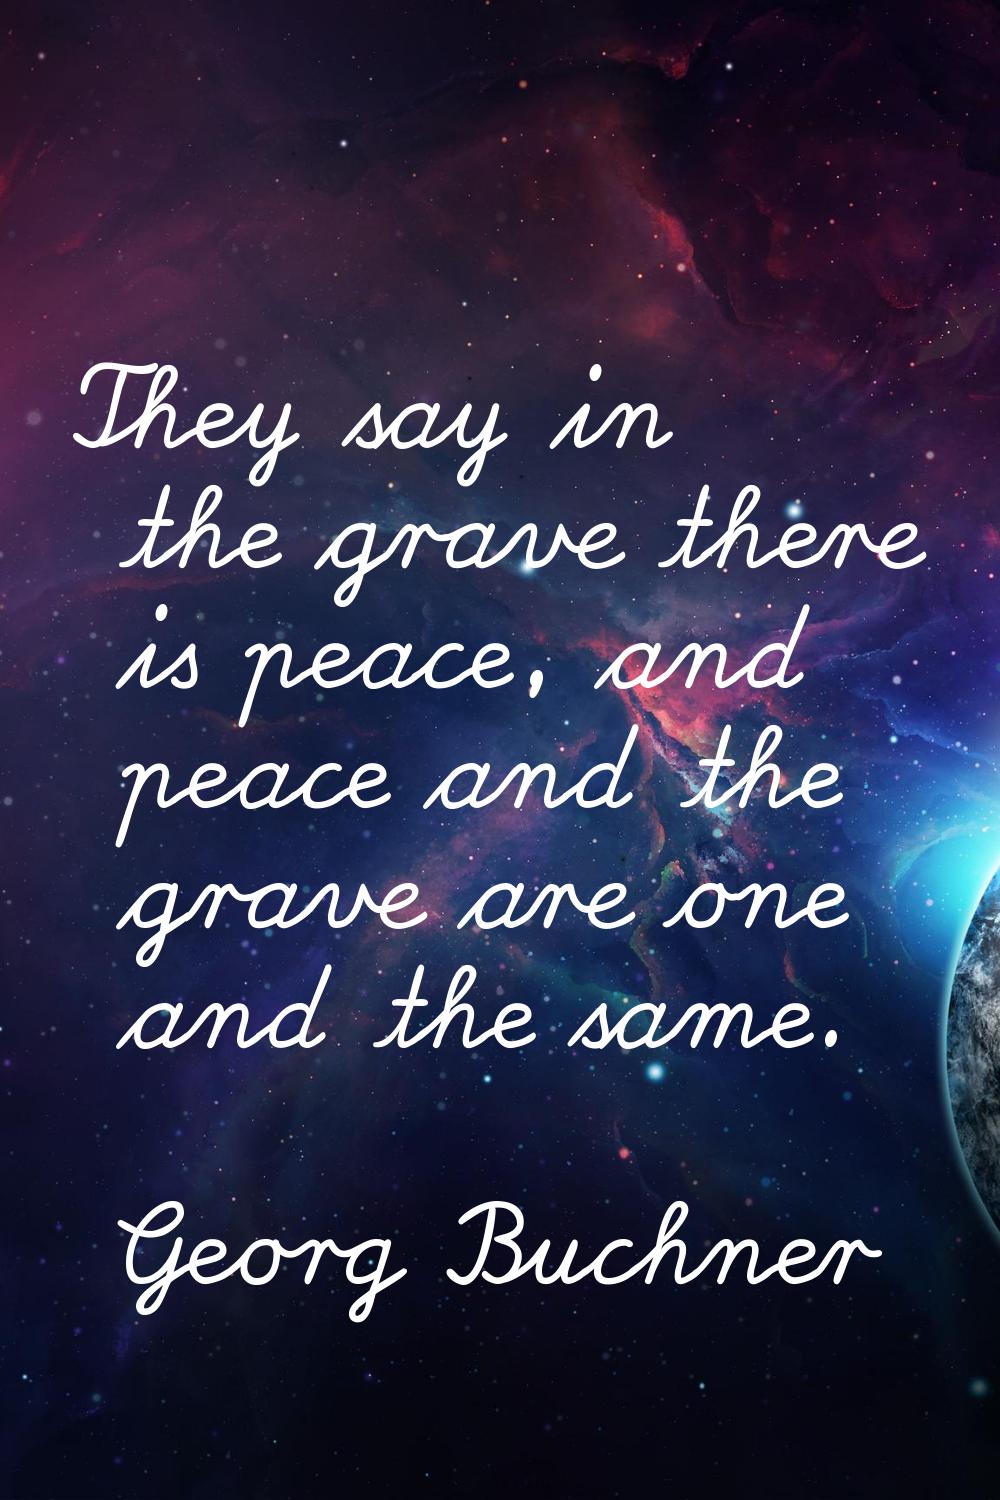 They say in the grave there is peace, and peace and the grave are one and the same.